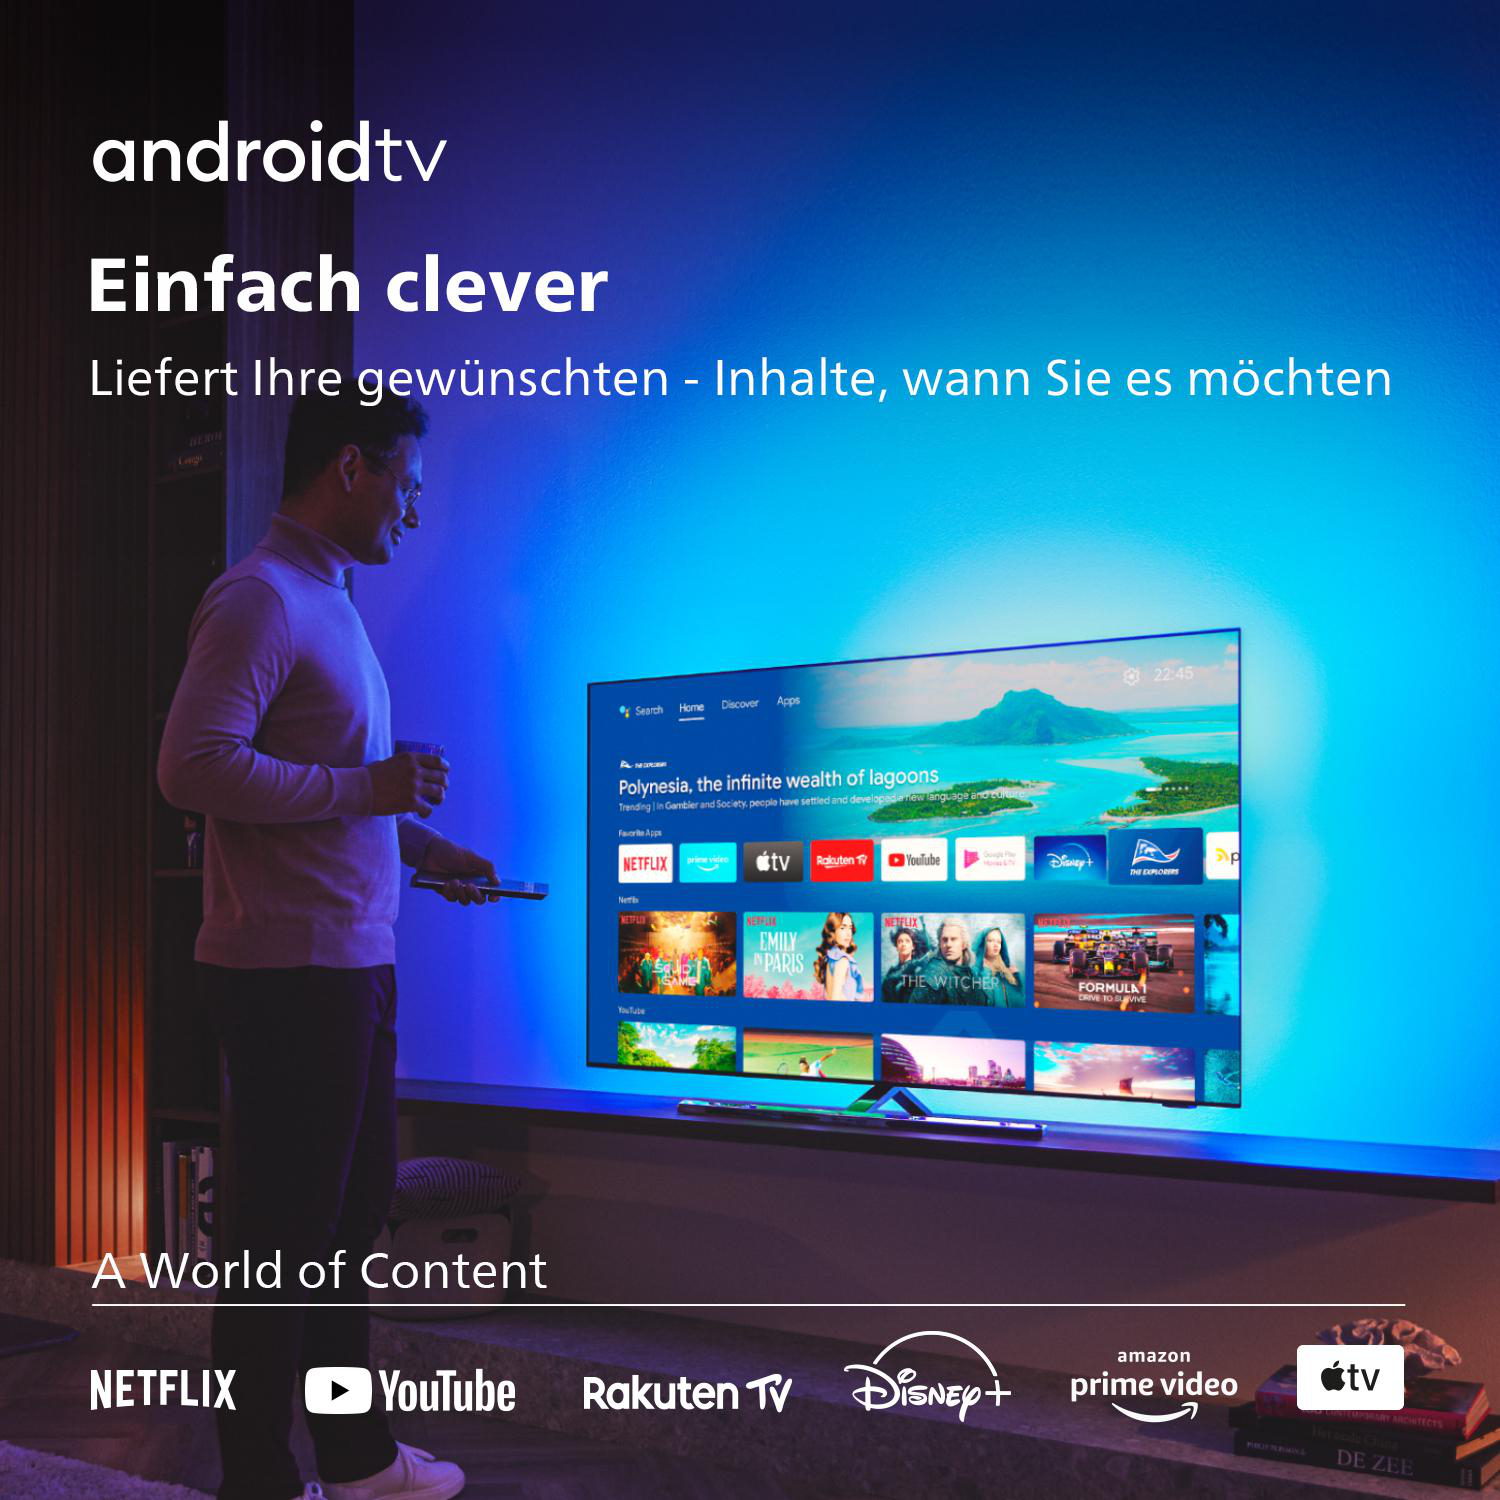 PHILIPS 77OLED807/12 OLED Fernseher (Flat, SMART UHD 11 77 Android / (R)) cm, TV™ 194 Ambilight, TV, 4K, Zoll